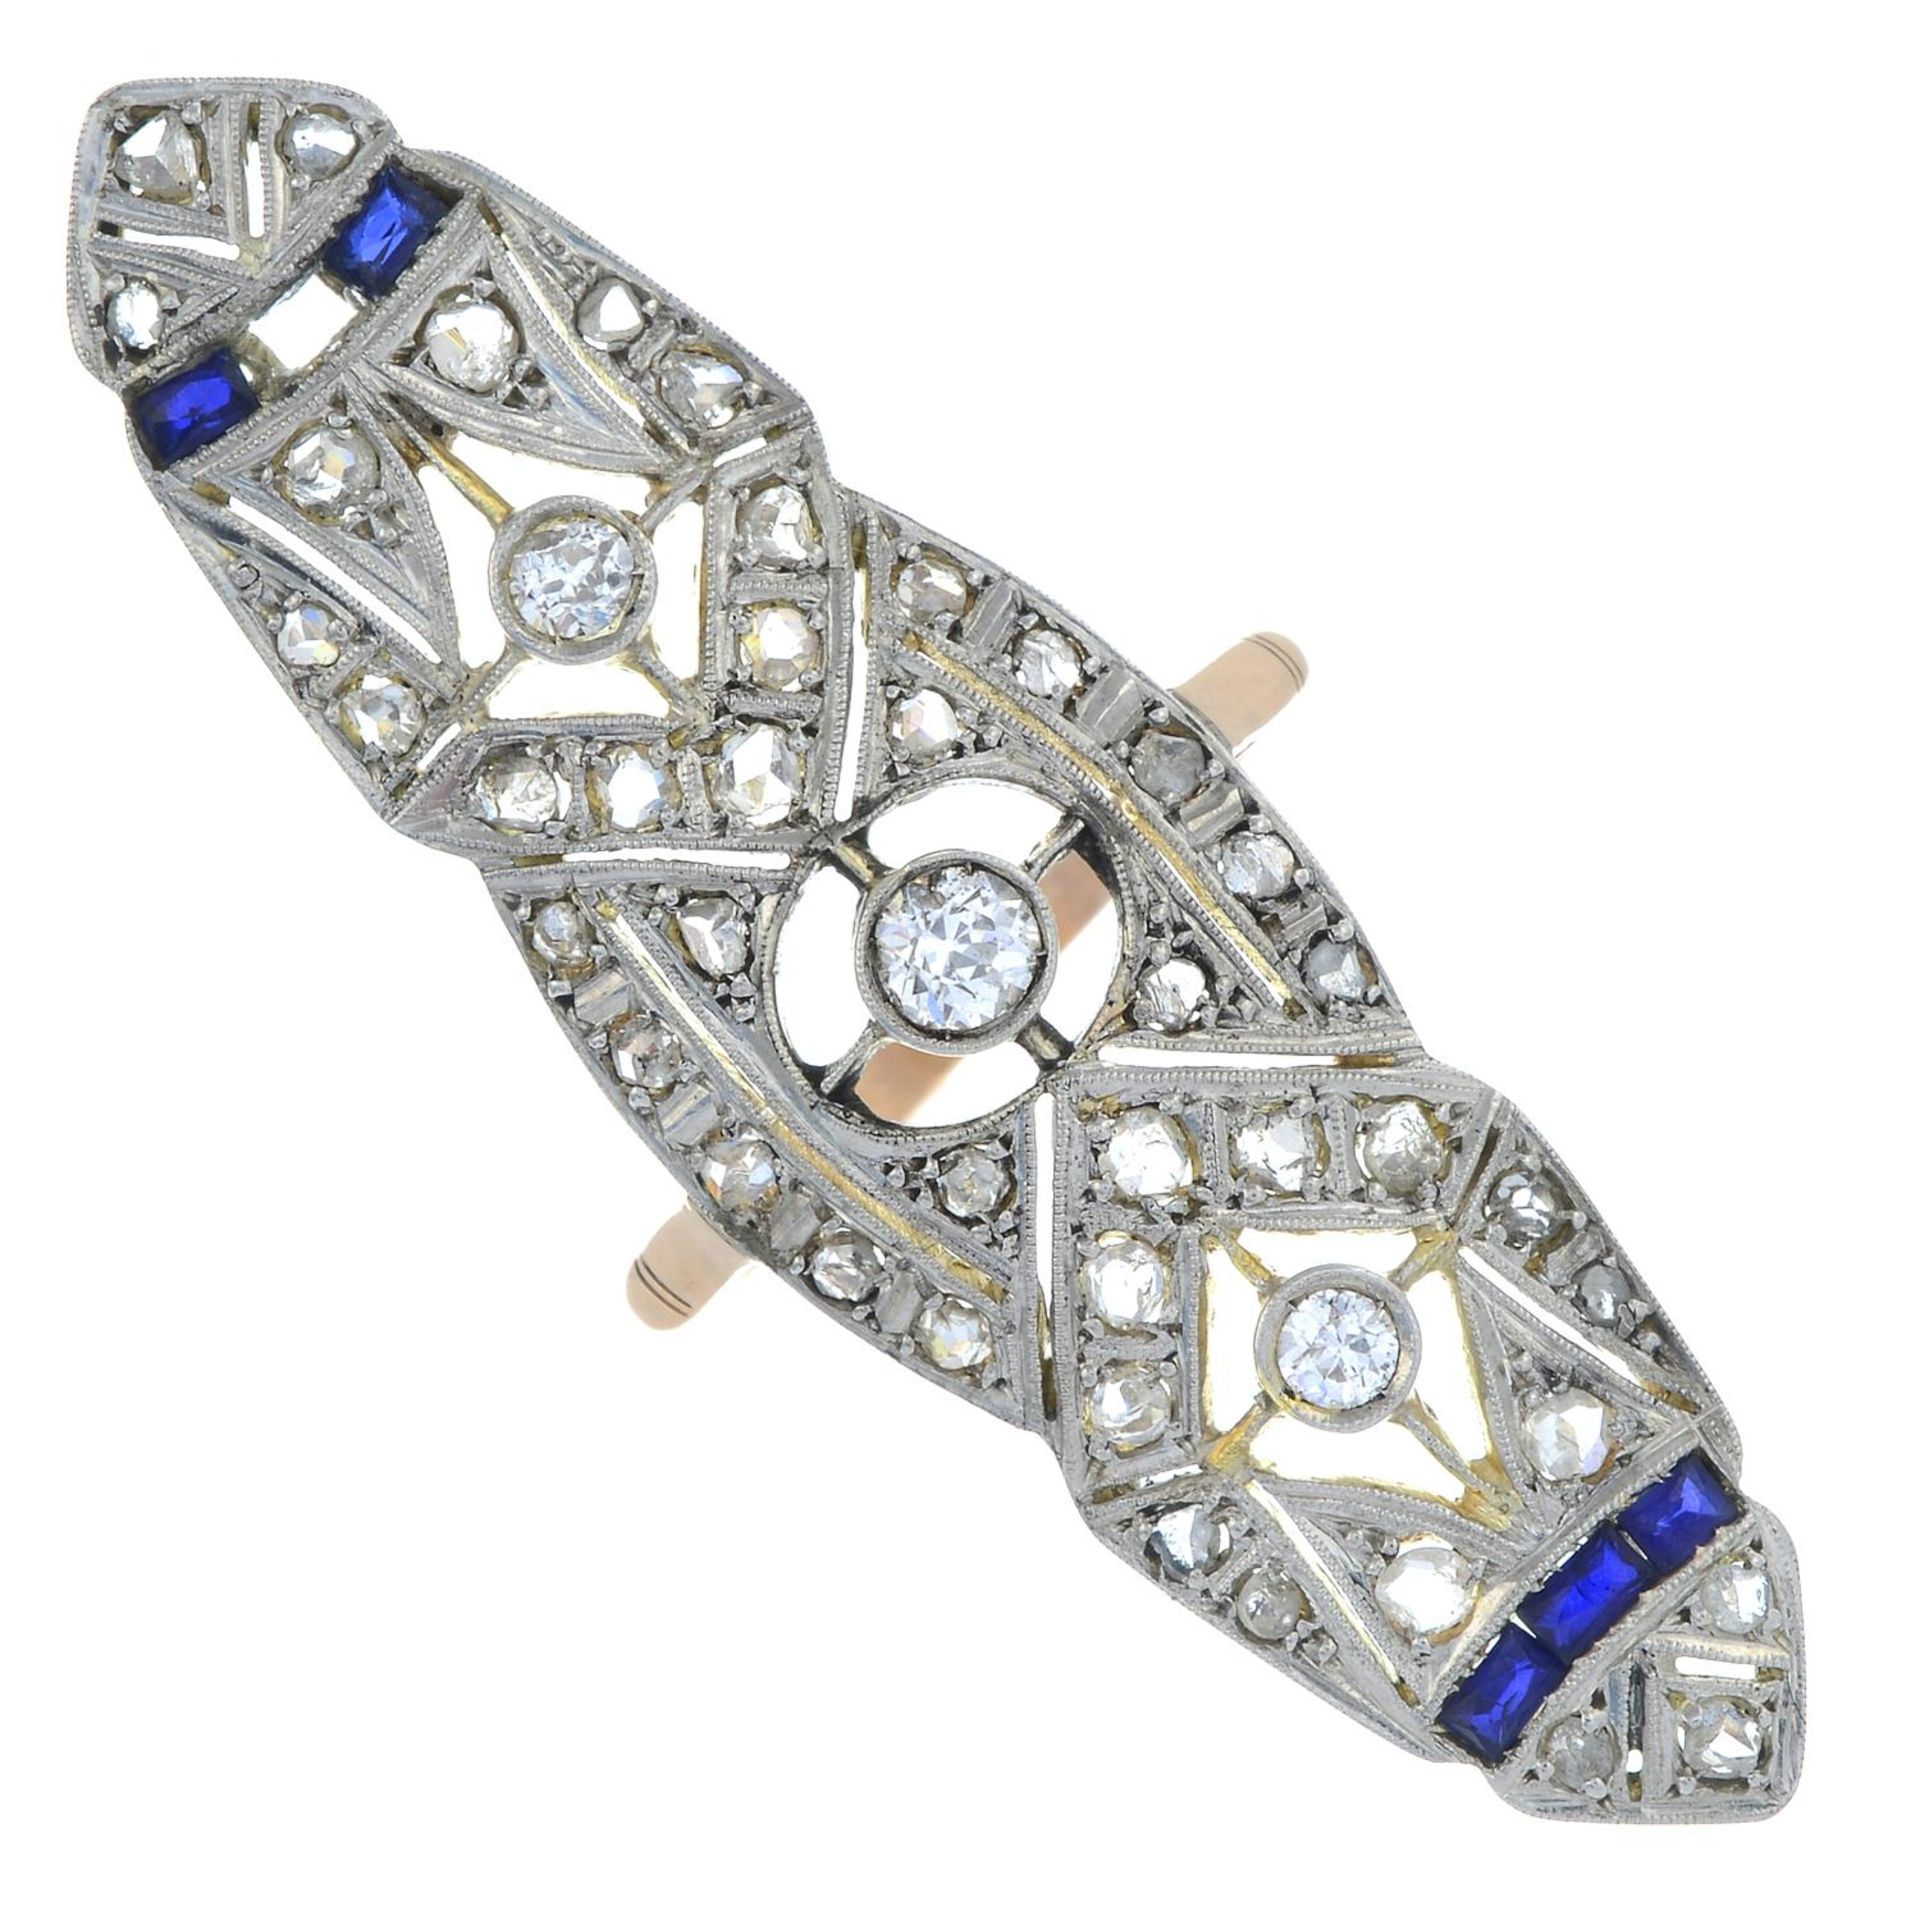 A rose and brilliant-cut diamond dress ring, with sapphire highlights.